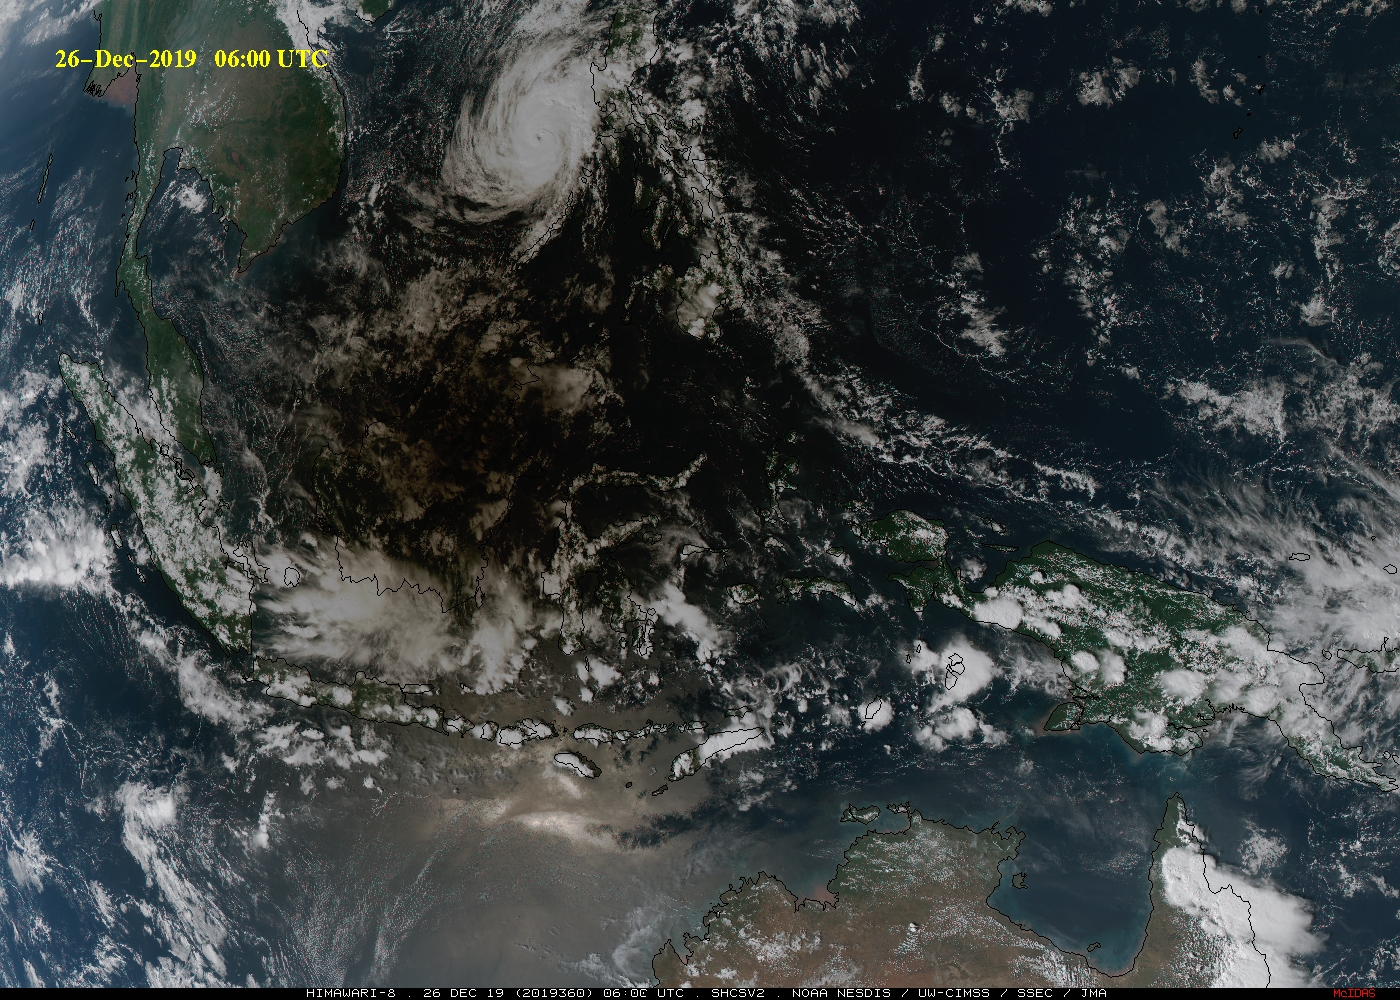 Himawari-8 True Color images centered over Indonesia [click to play animation | MP4]